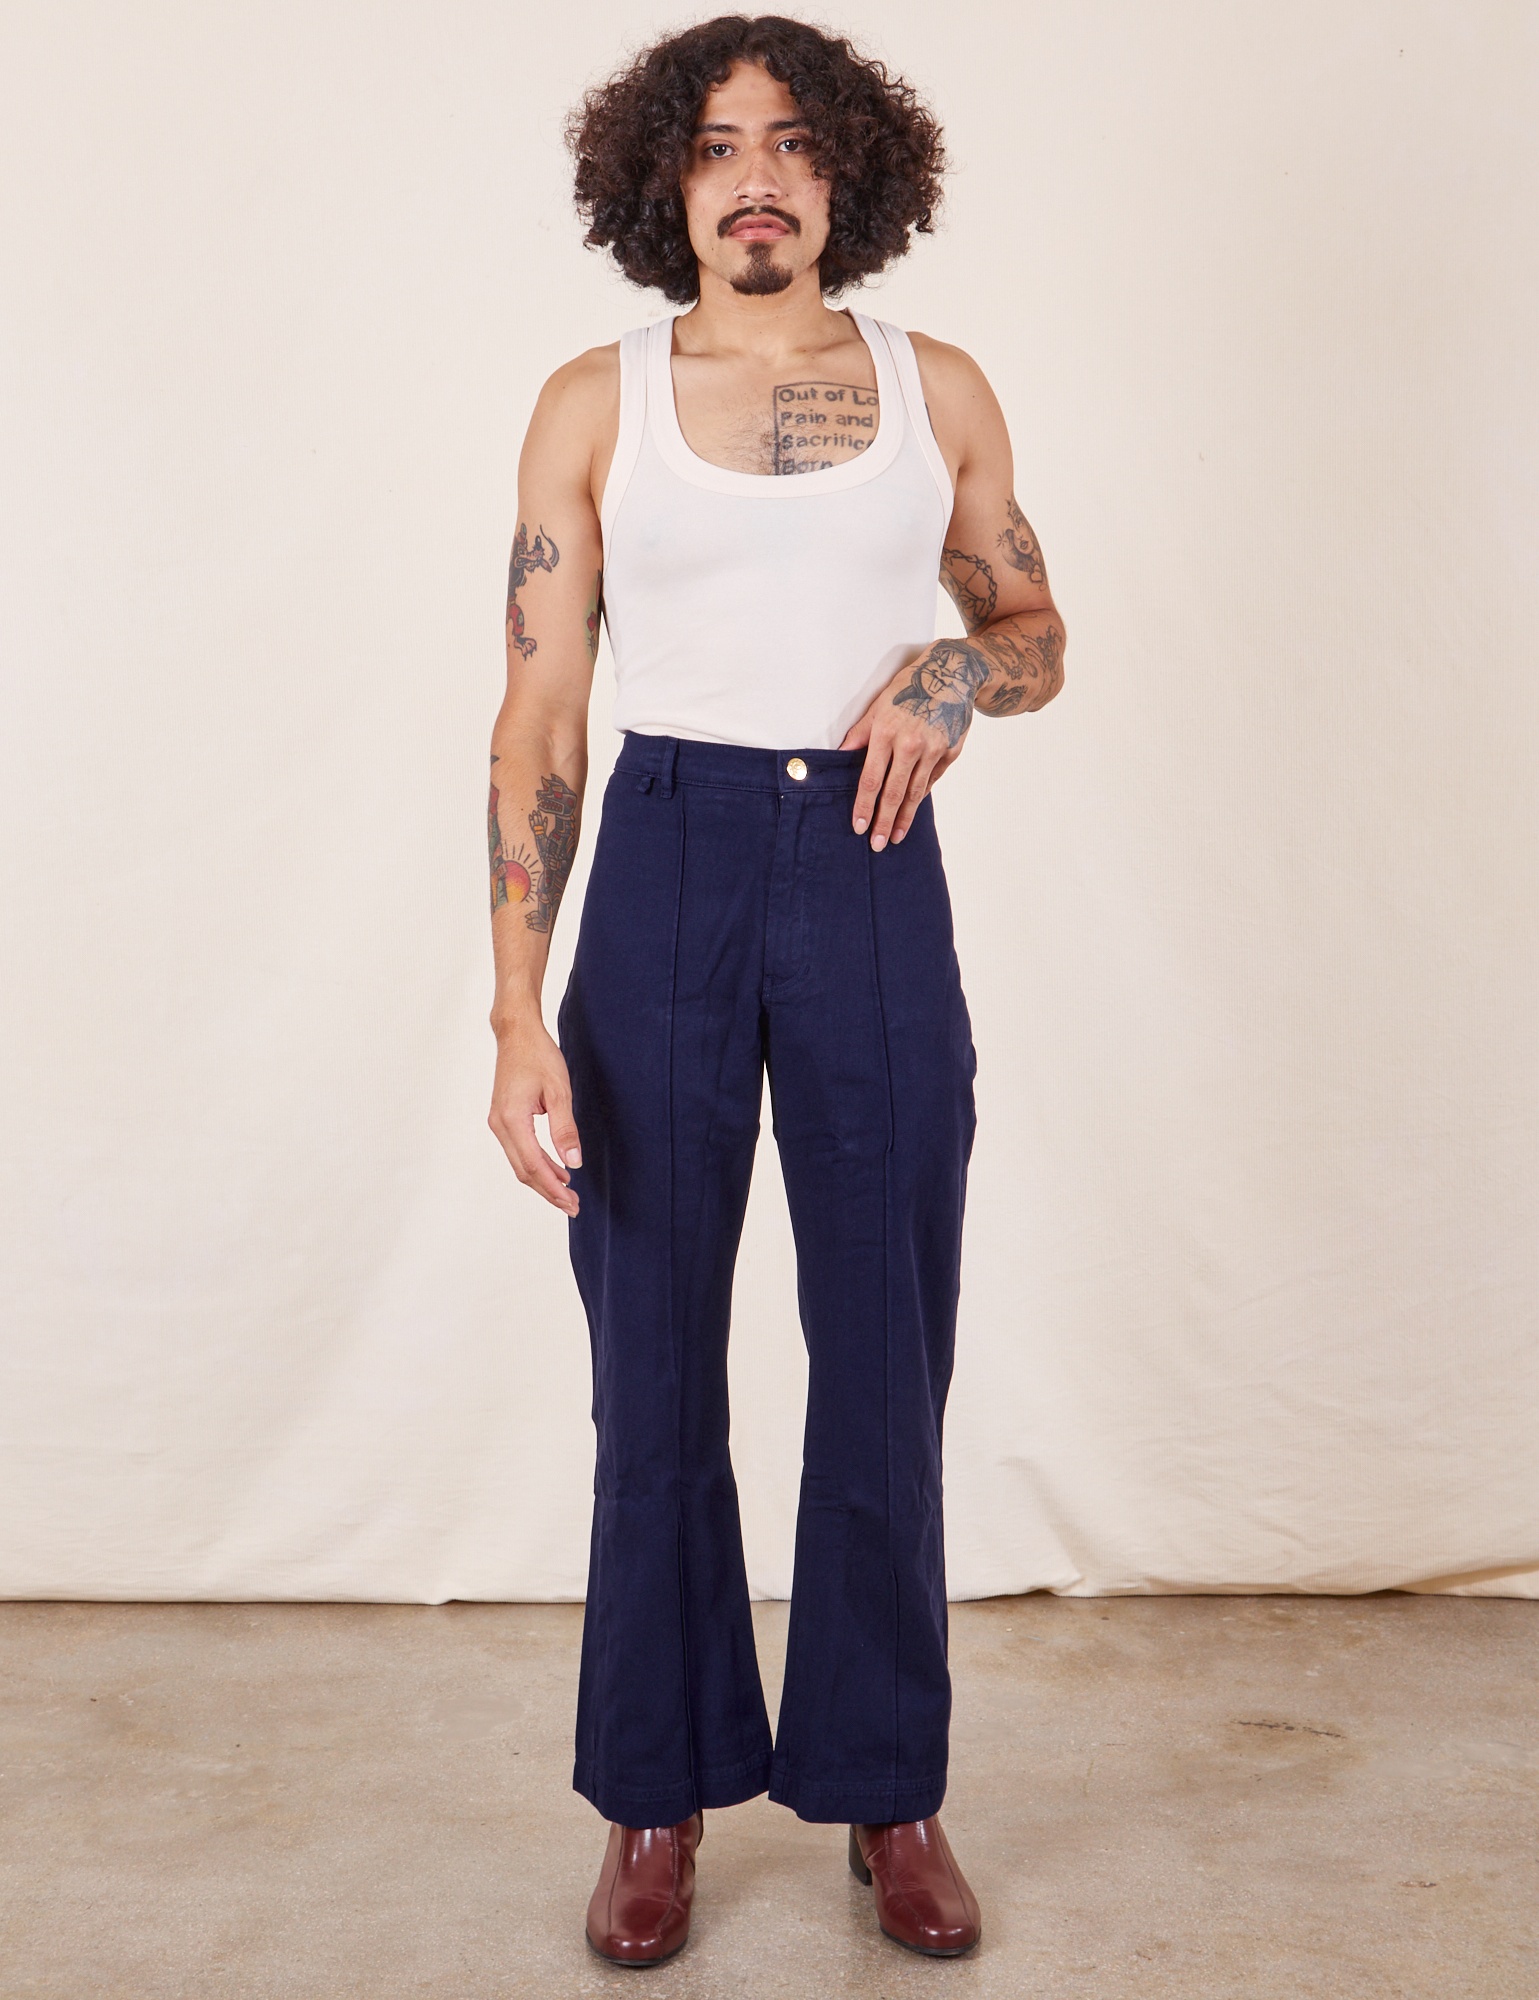 Jesse is 5&#39;8&quot; and wearing XS Western Pants in Navy Blue paired with vintage off-white Tank Top